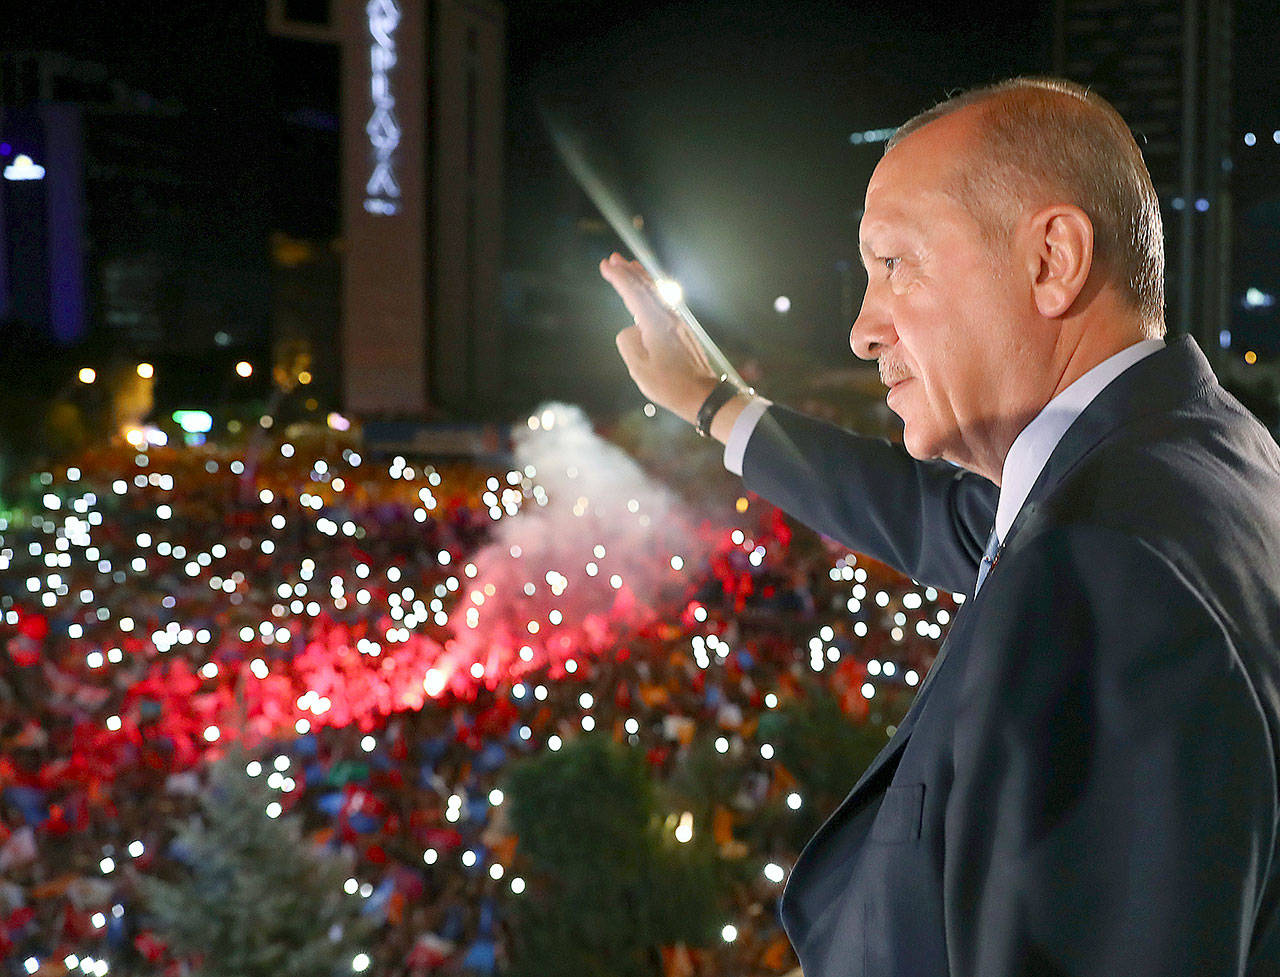 Turkish President Recep Tayyip Erdogan waves to supporters of his ruling Justice and Development Party in Ankara, Turkey, early Monday. (Presidency Press Service via AP, Pool)